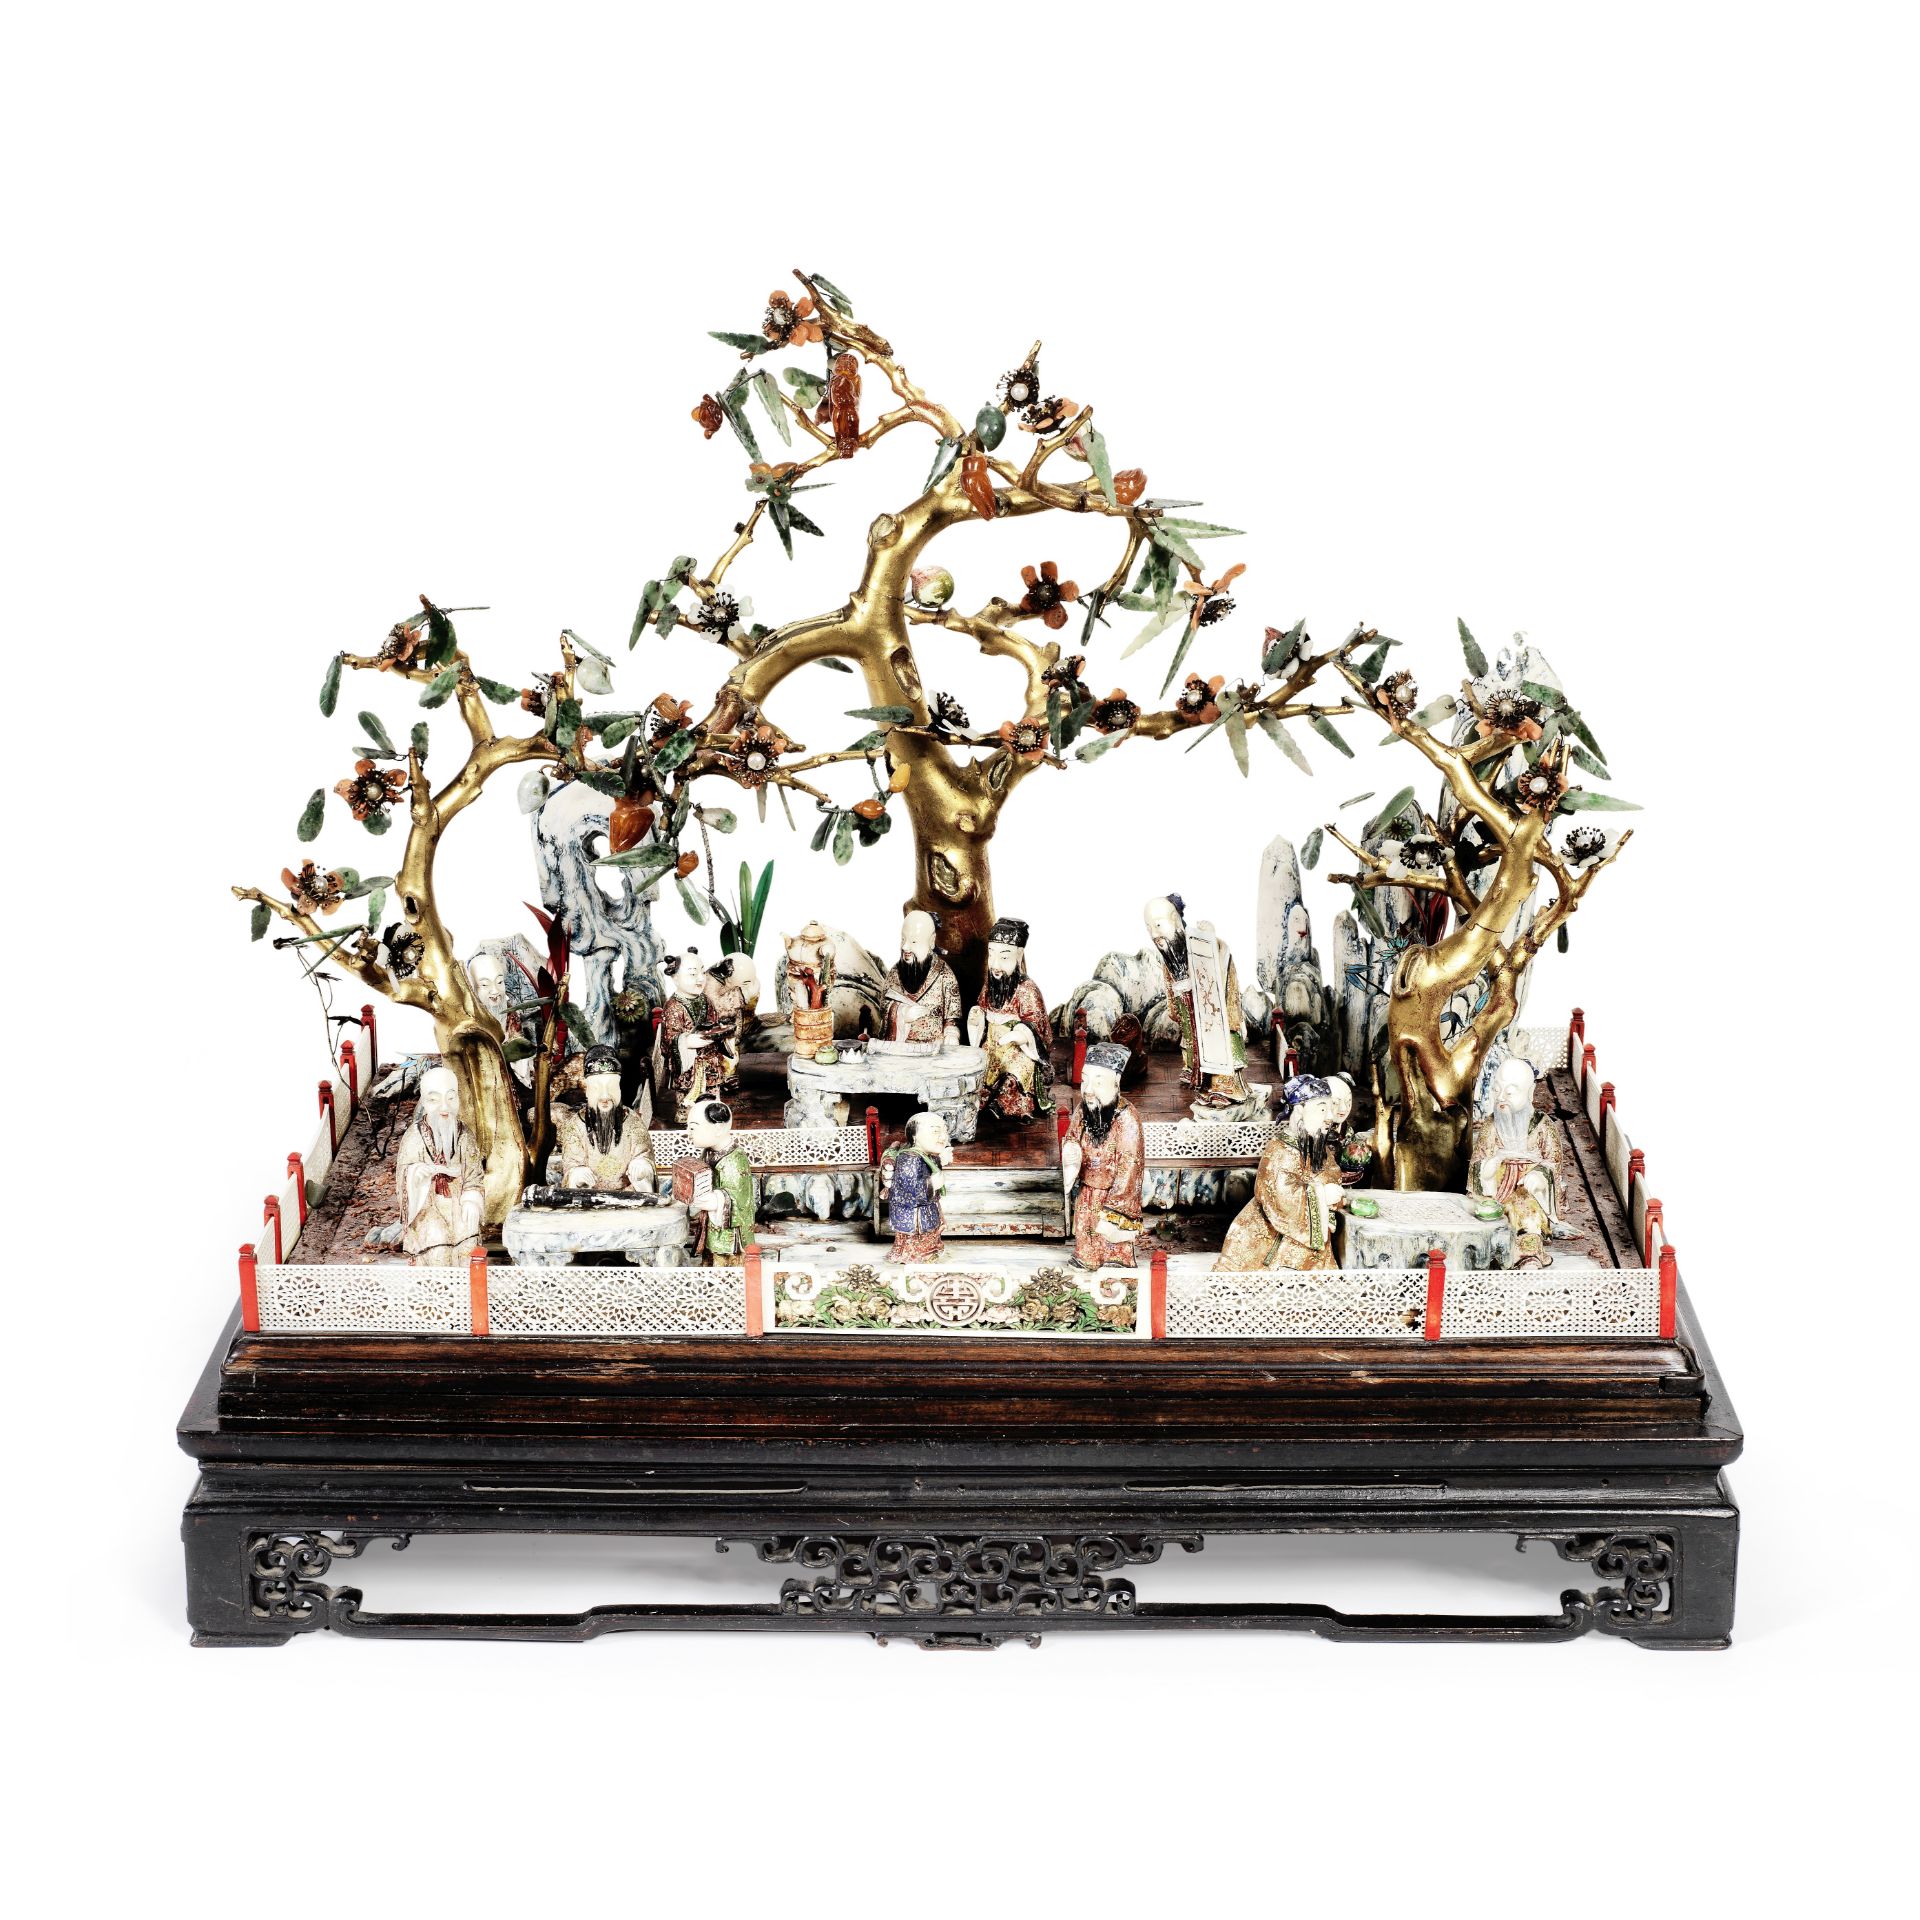 A fine late 18th / early 19th century Chinese export carved ivory and hardstone diorama of figure...